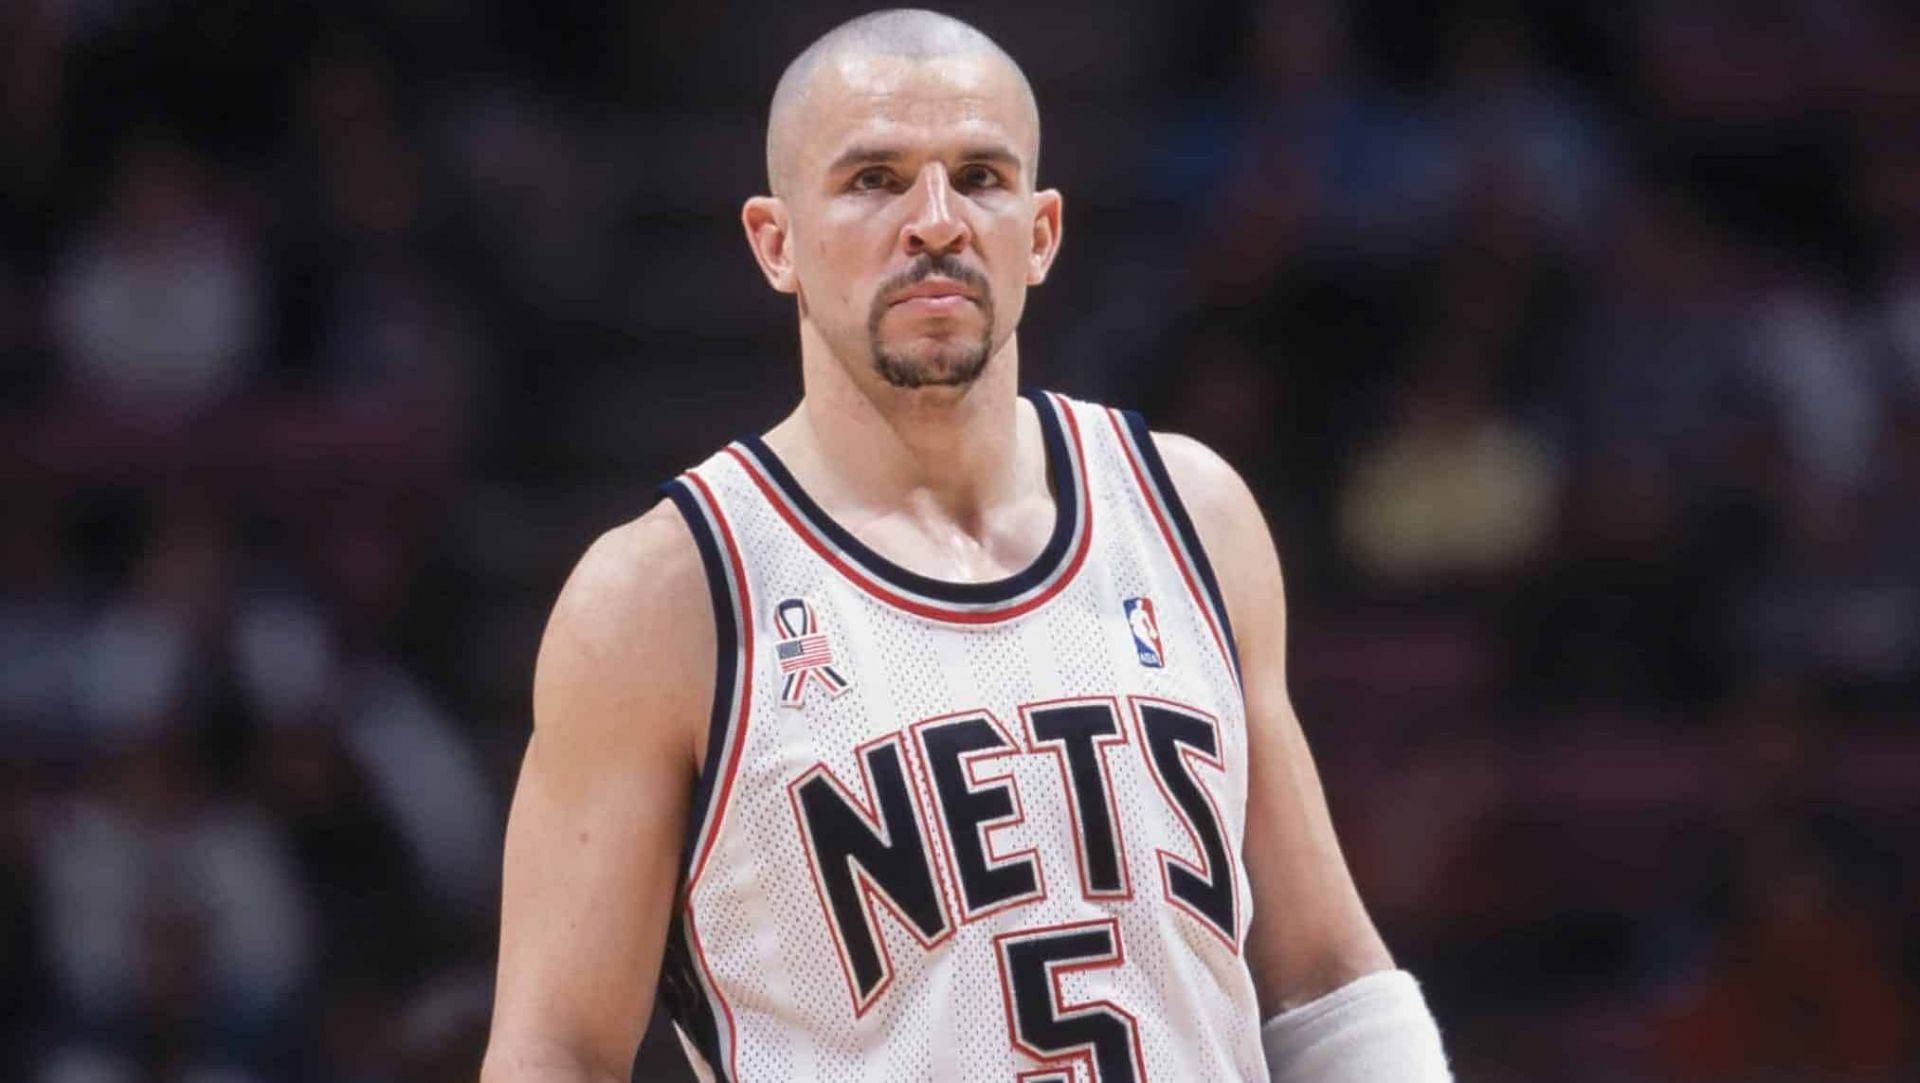 Jason Kidd was also a strong defensive presence at the point guard position